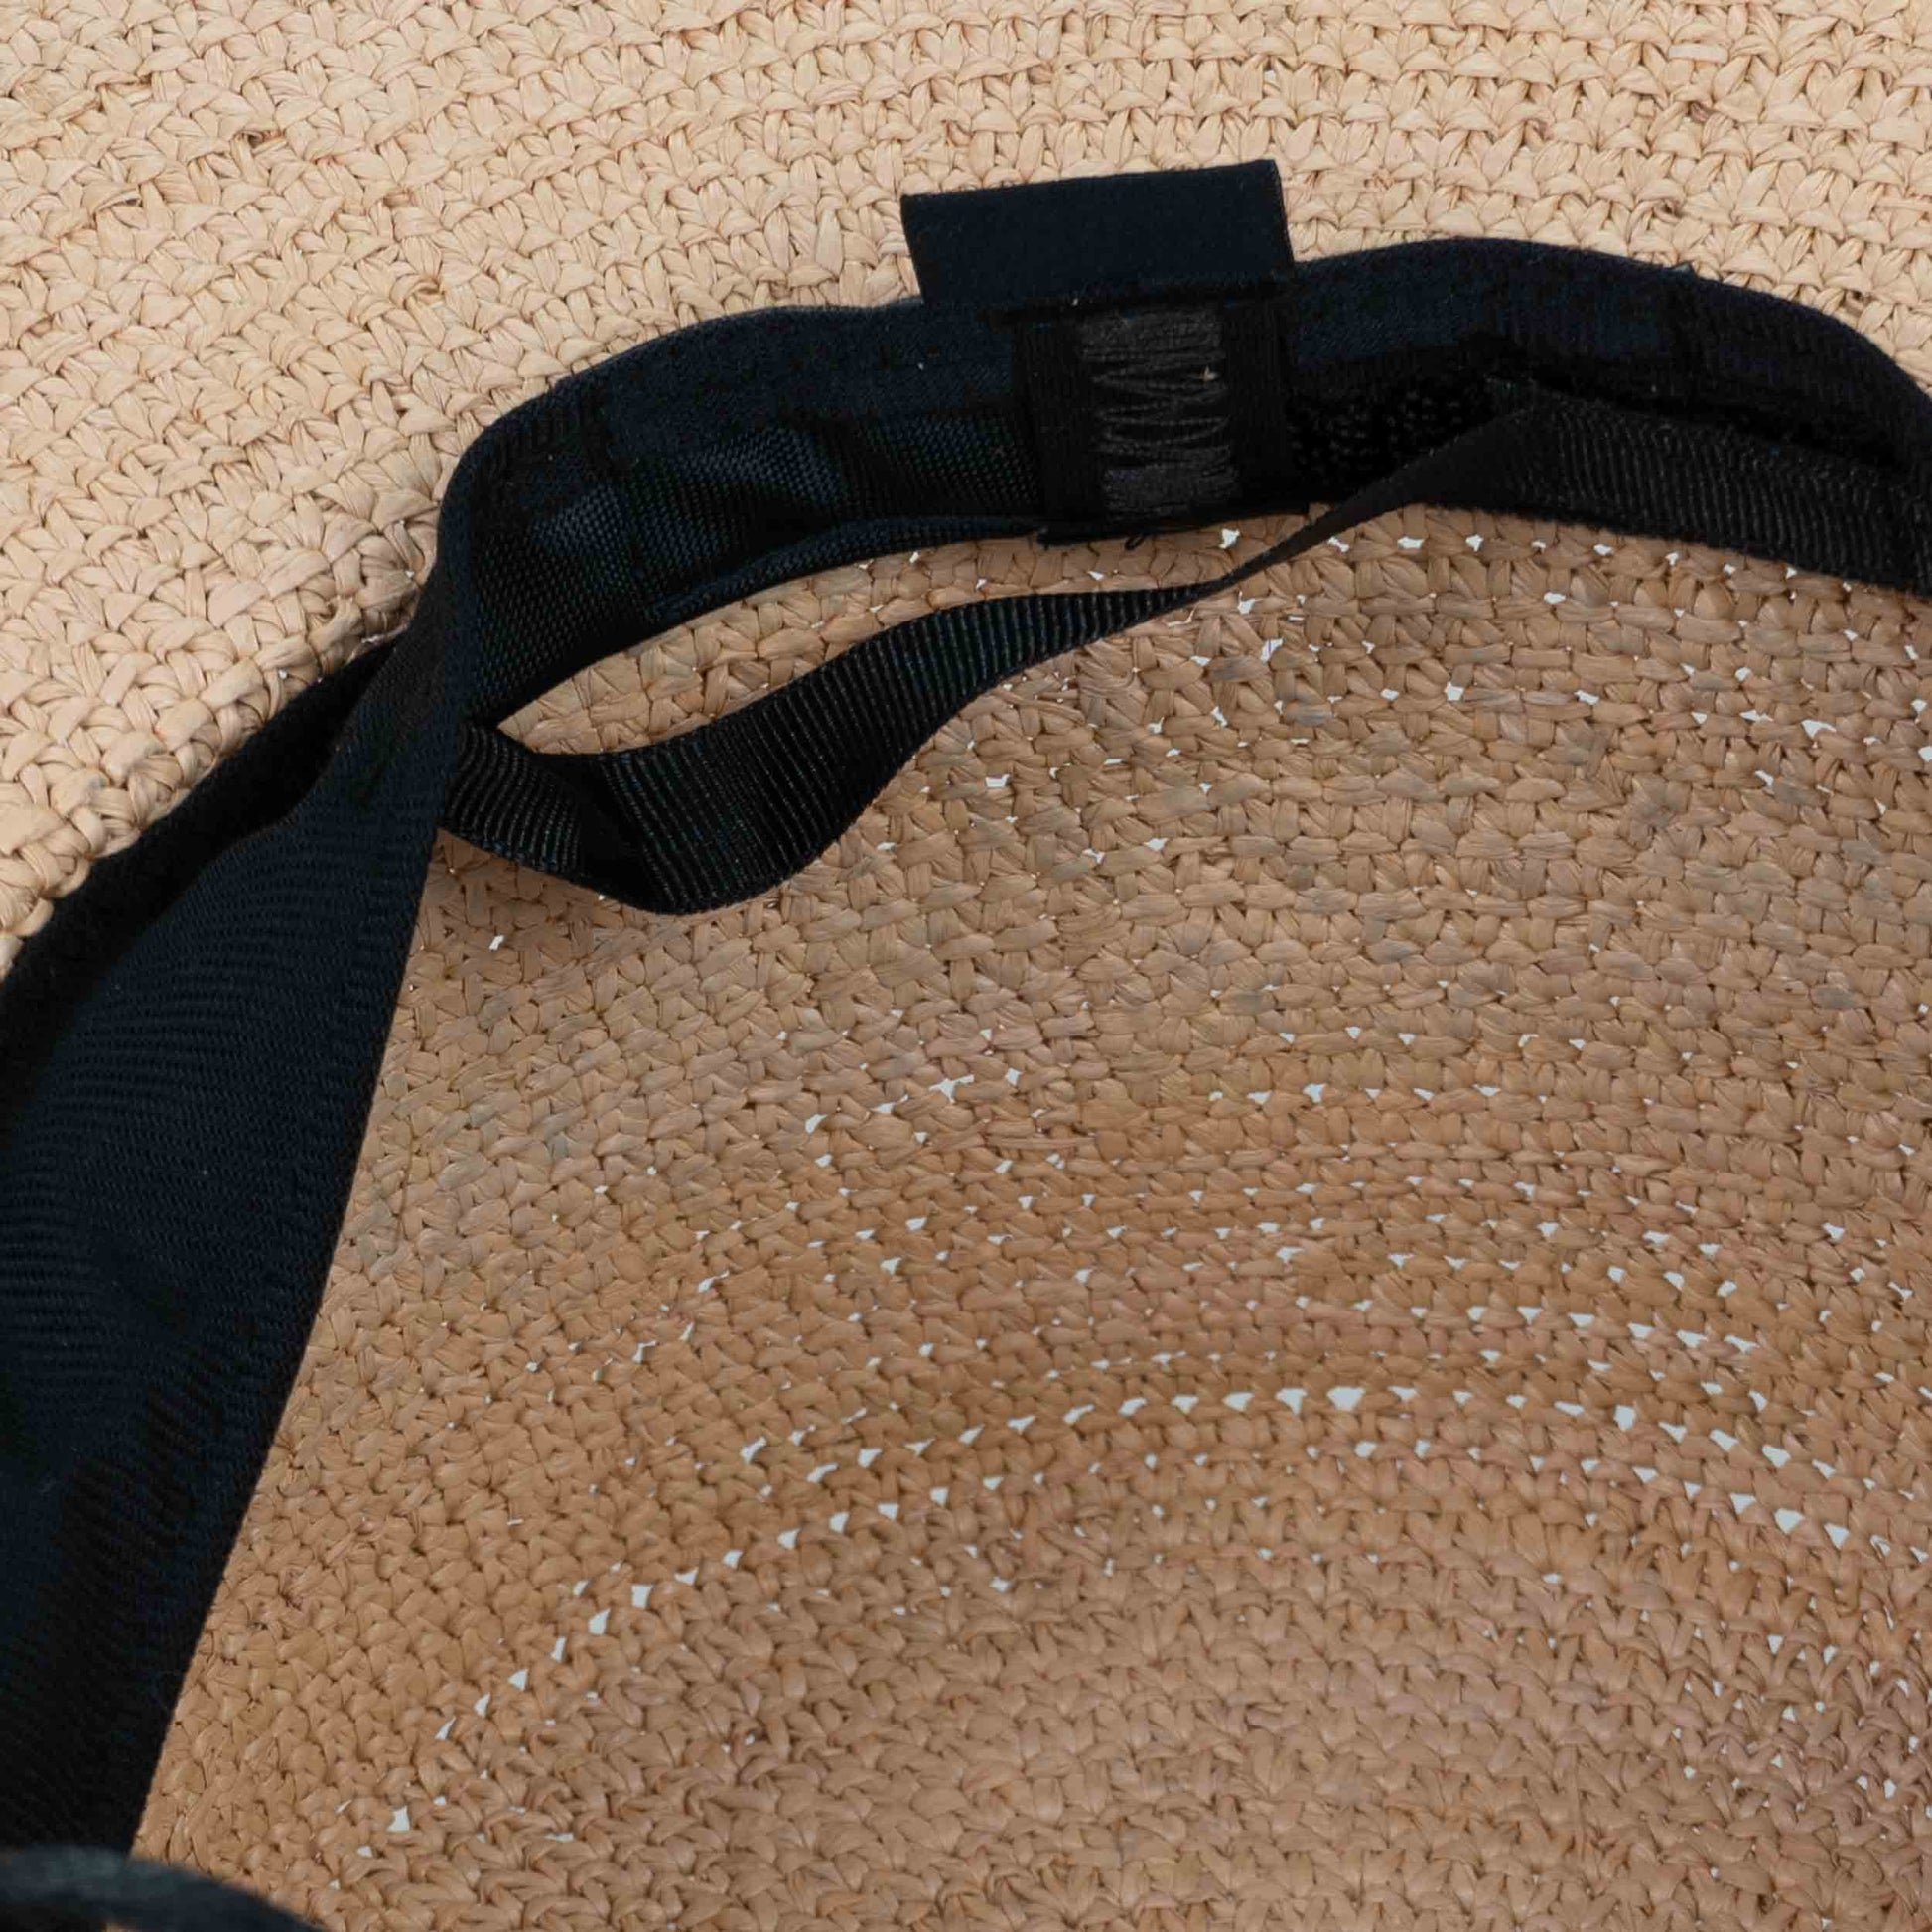 Handwoven Toquilla Straw hat in Natural/ Black